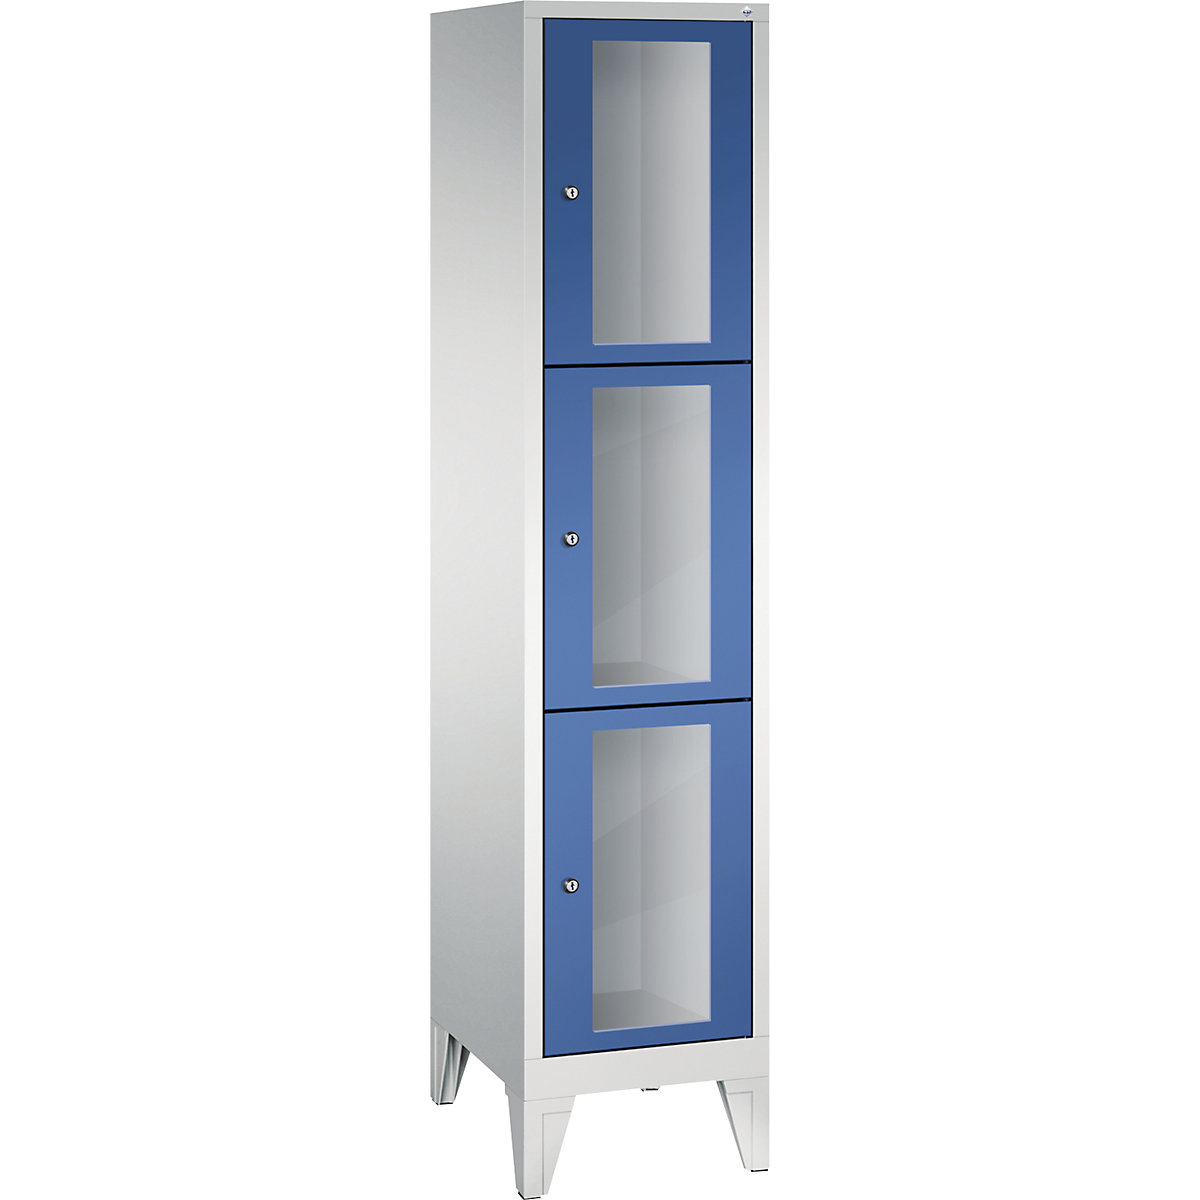 CLASSIC locker unit, compartment height 510 mm, with feet – C+P, 3 compartments, width 420 mm, gentian blue door-3